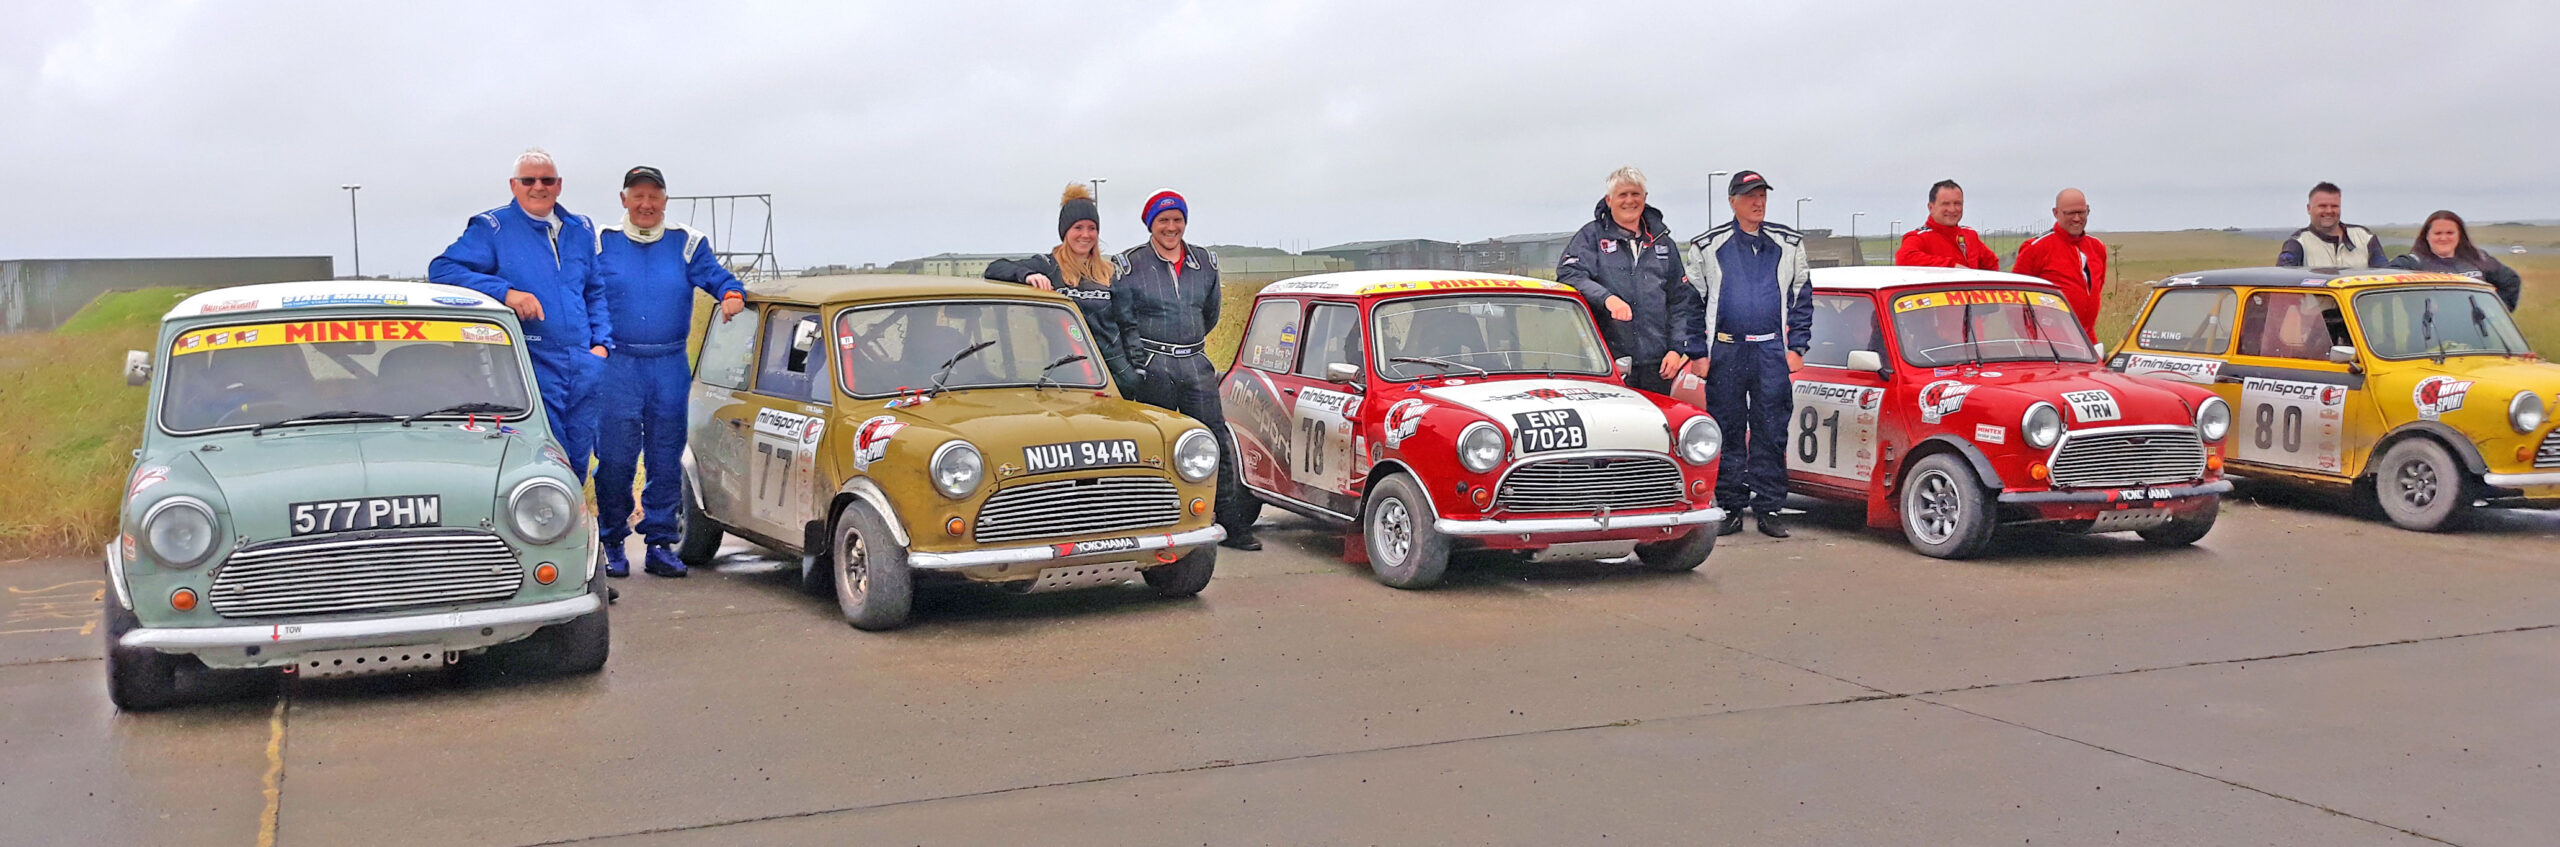 Mini Sport Cup 2021 Round 1: Brawdy Stages Rally